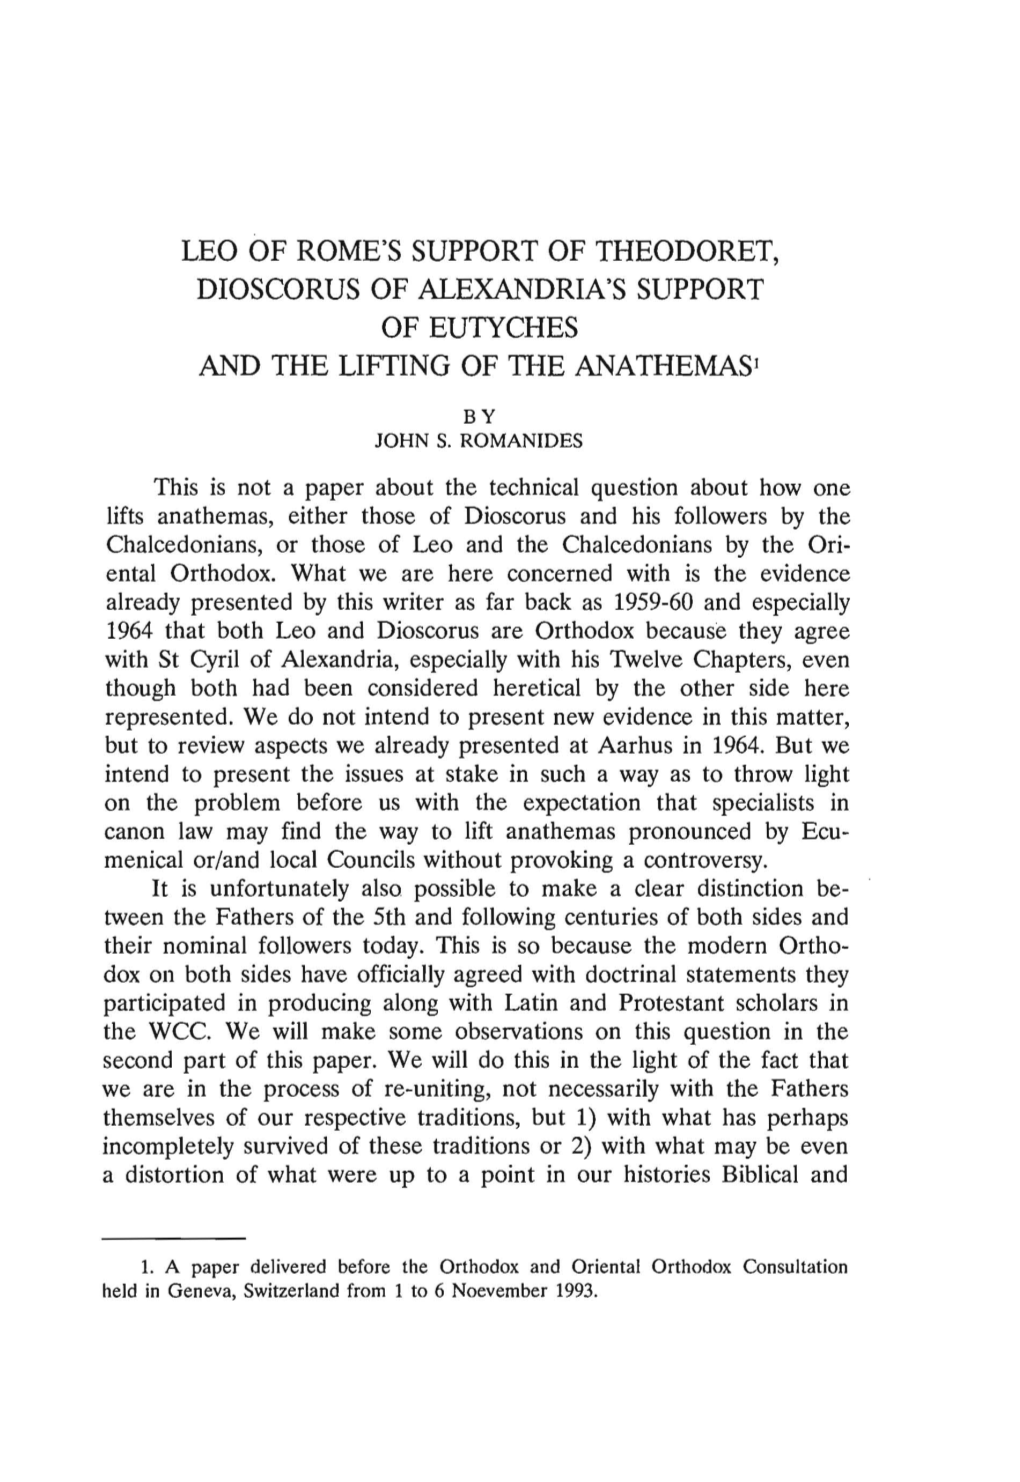 Leo of Support of Theodoret, Dioscorus of Alexandria's Support of Eutyches and Lifting of Anathemasi